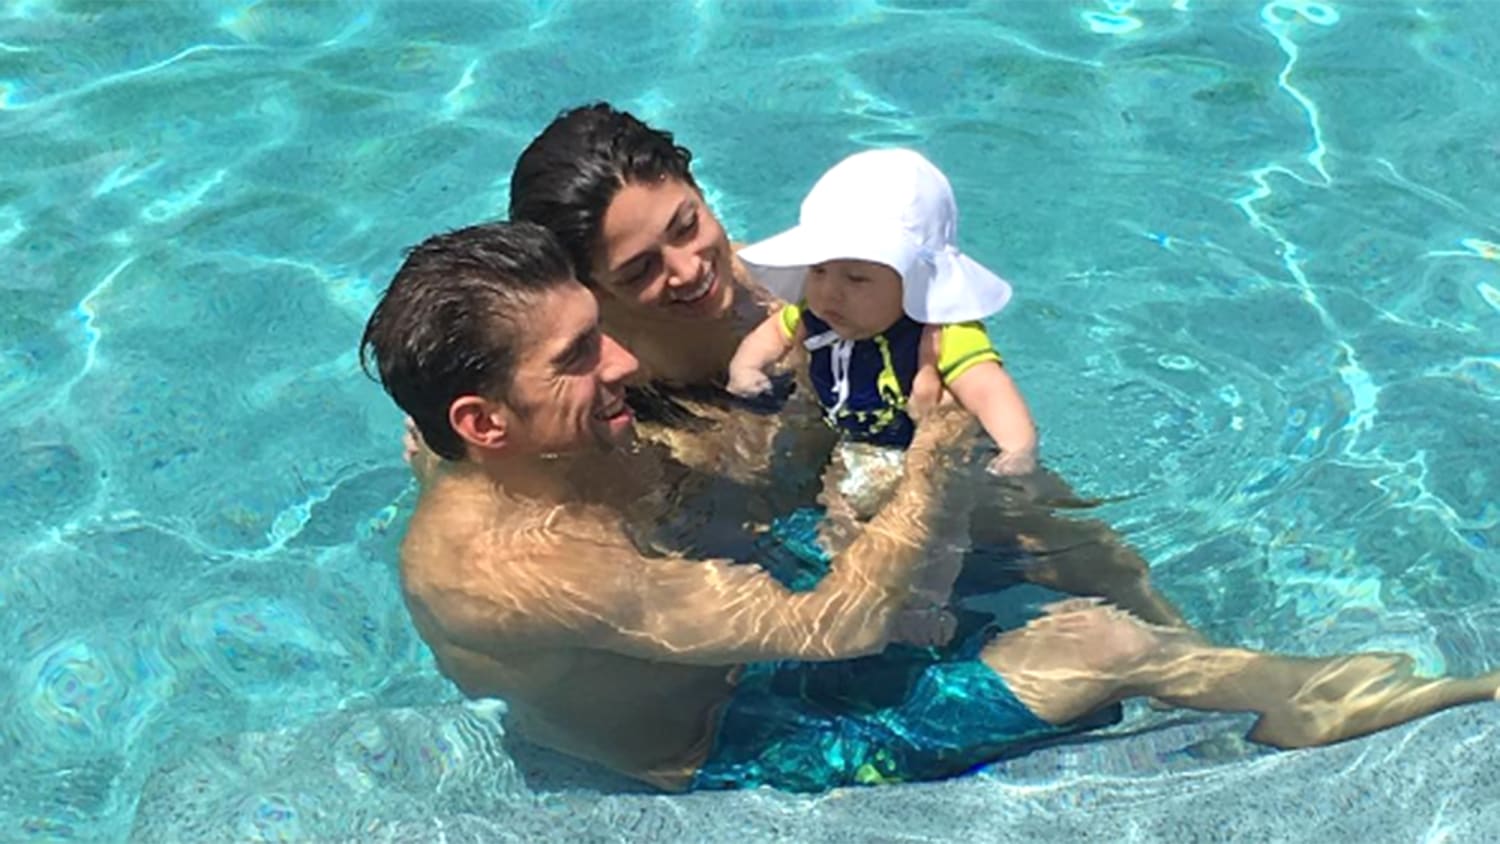 Michael Phelps celebrates retirement in the pool — with family